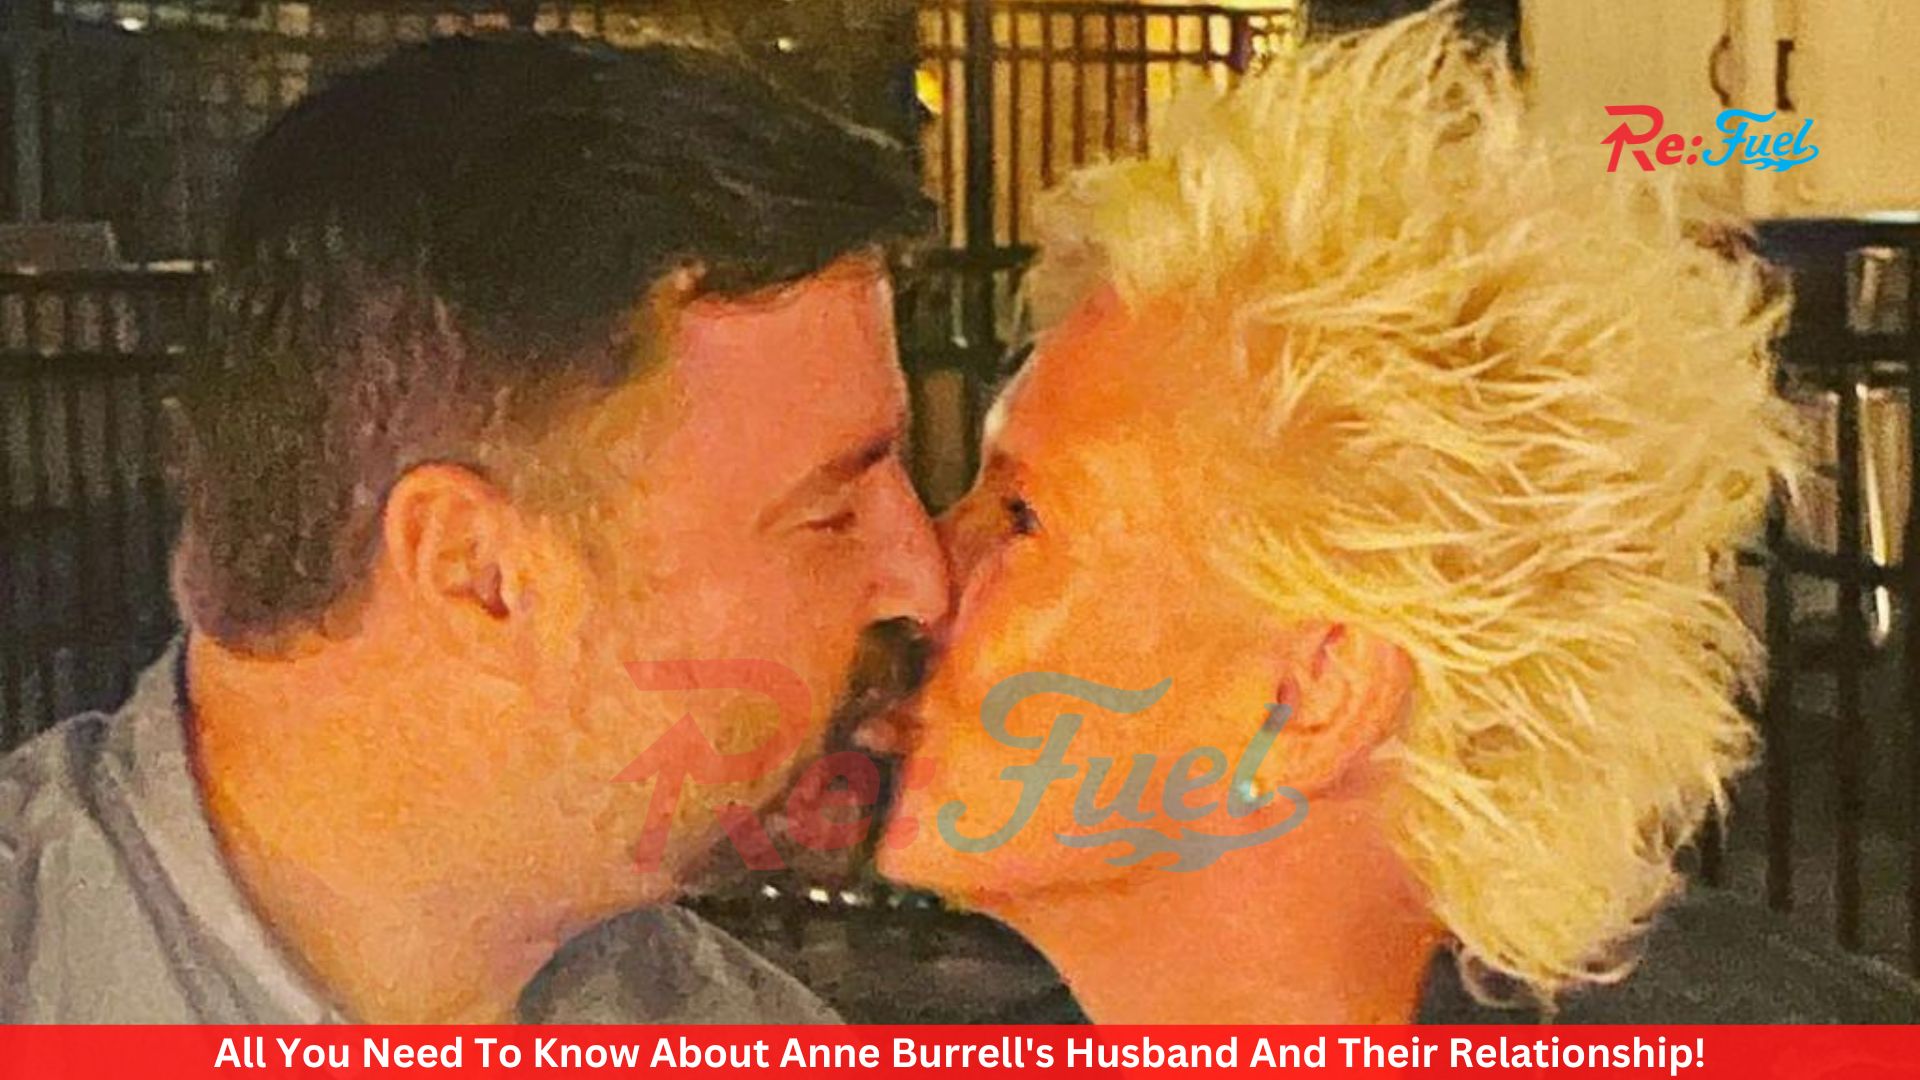 All You Need To Know About Anne Burrell's Husband And Their Relationship!